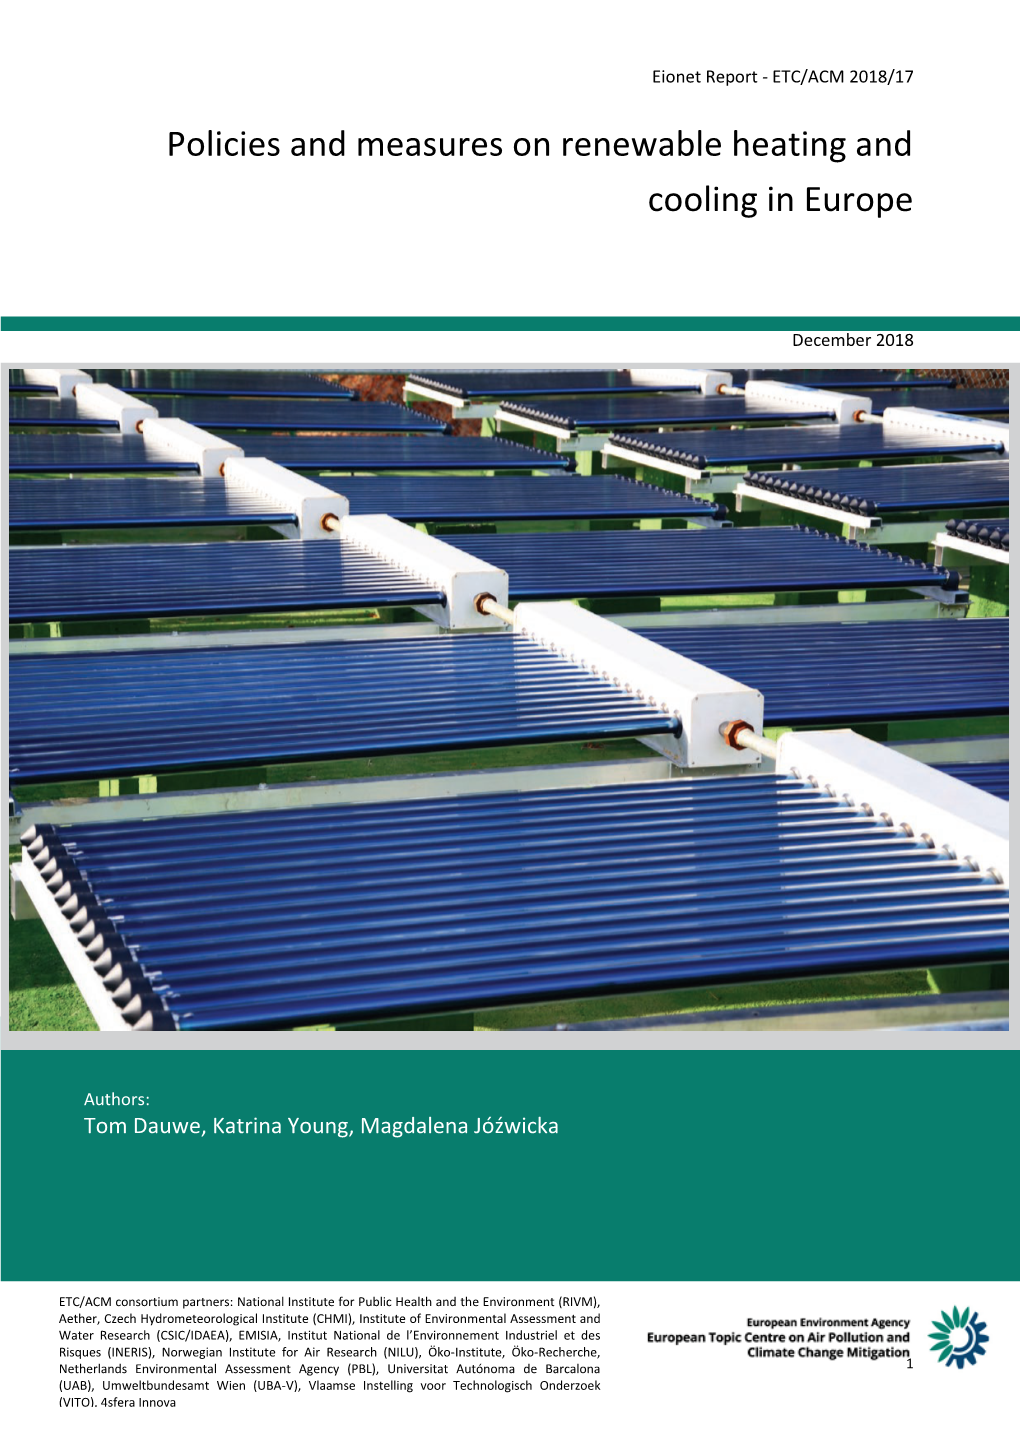 Policies and Measures on Renewable Heating and Cooling in Europe